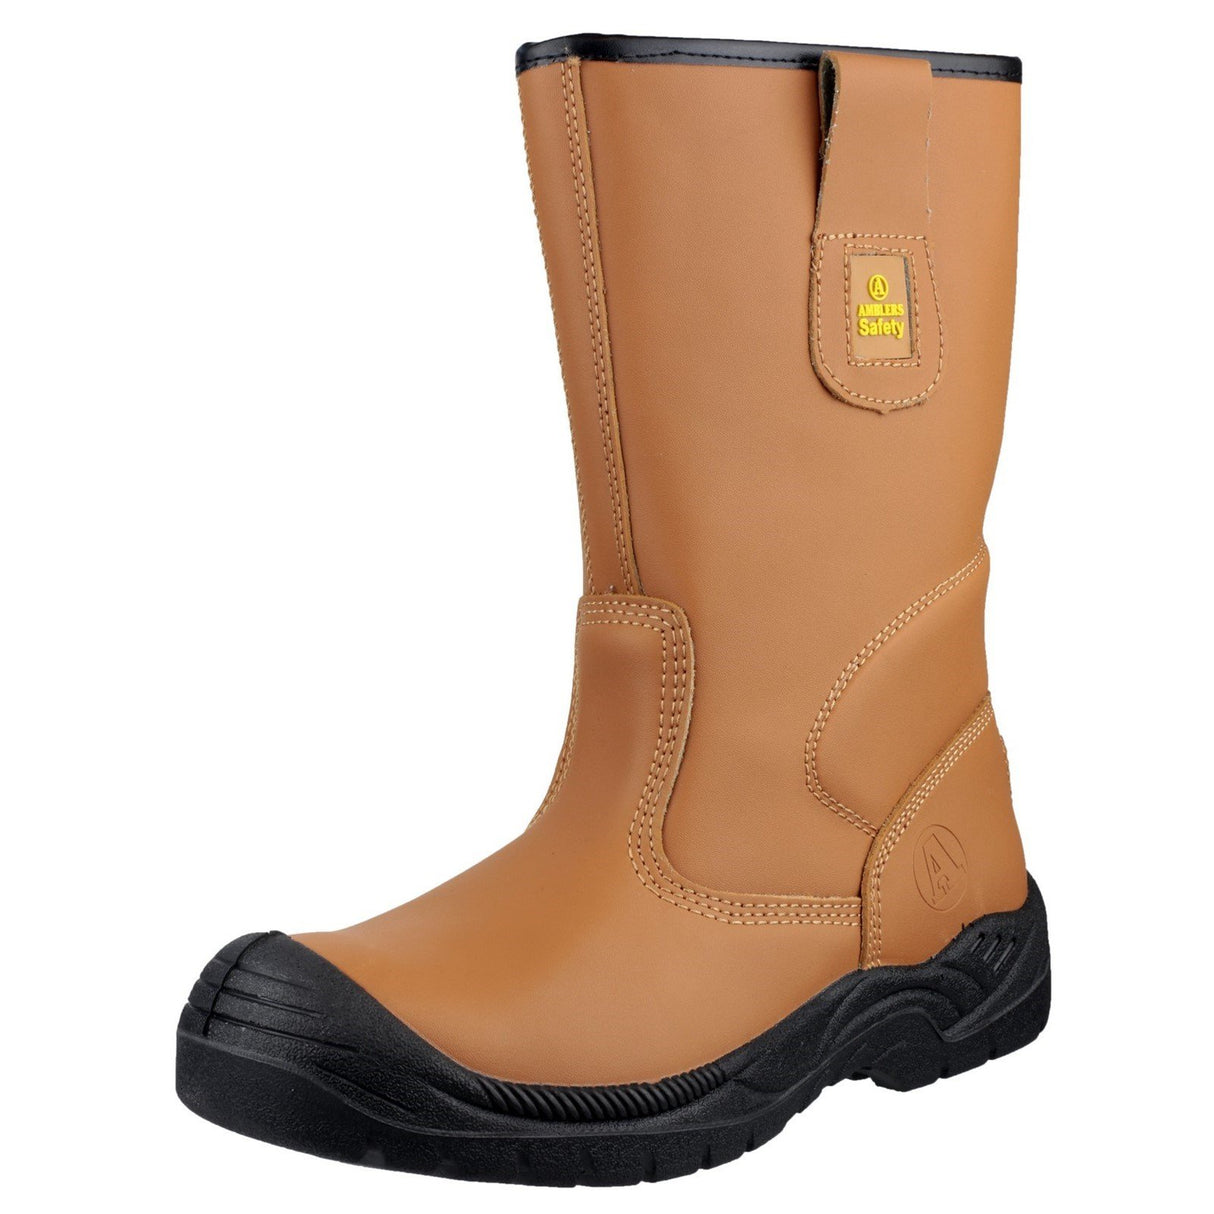 Amblers Safety Water Resistant Scuff Cap Safety Rigger Boots